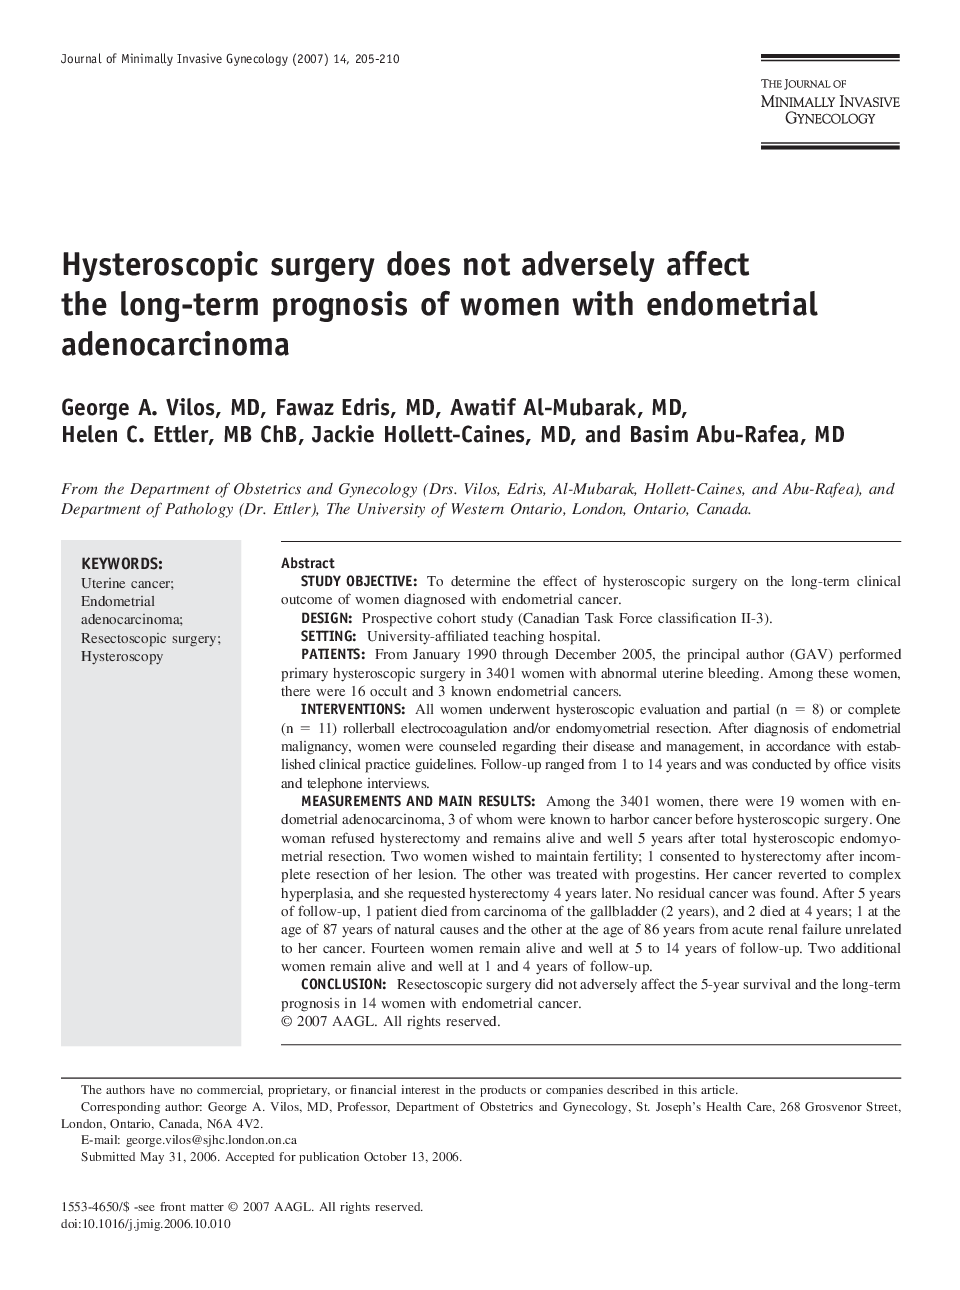 Hysteroscopic surgery does not adversely affect the long-term prognosis of women with endometrial adenocarcinoma 